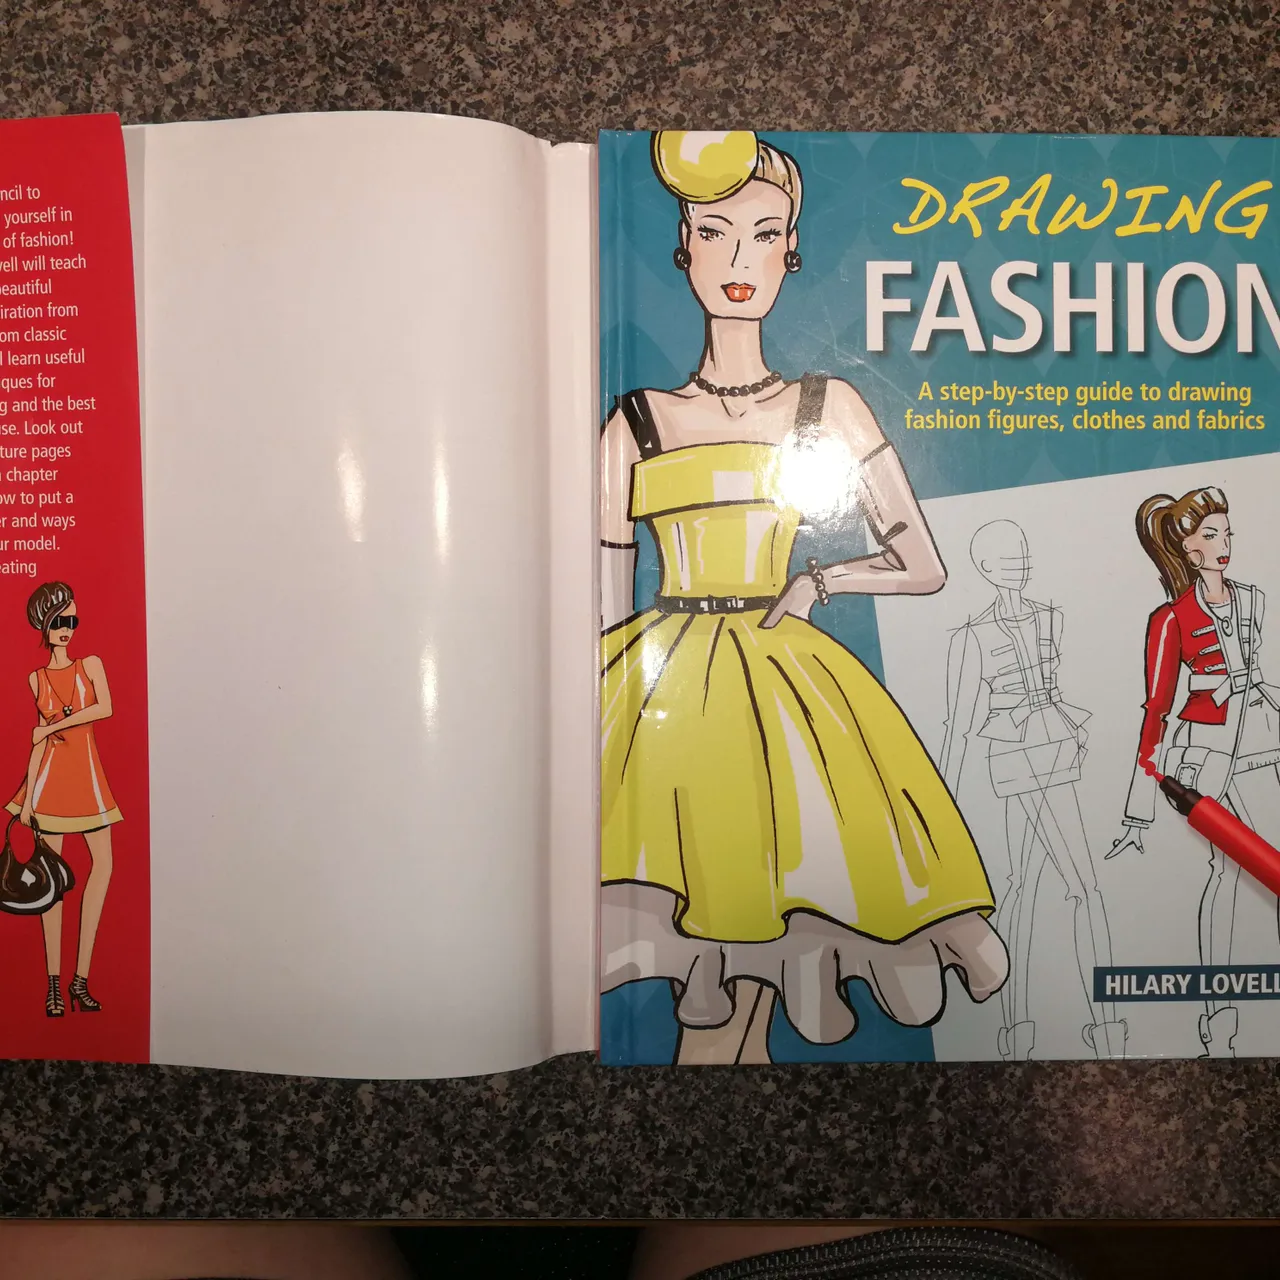 Drawing Fashion Book by Hillary Lovell photo 1